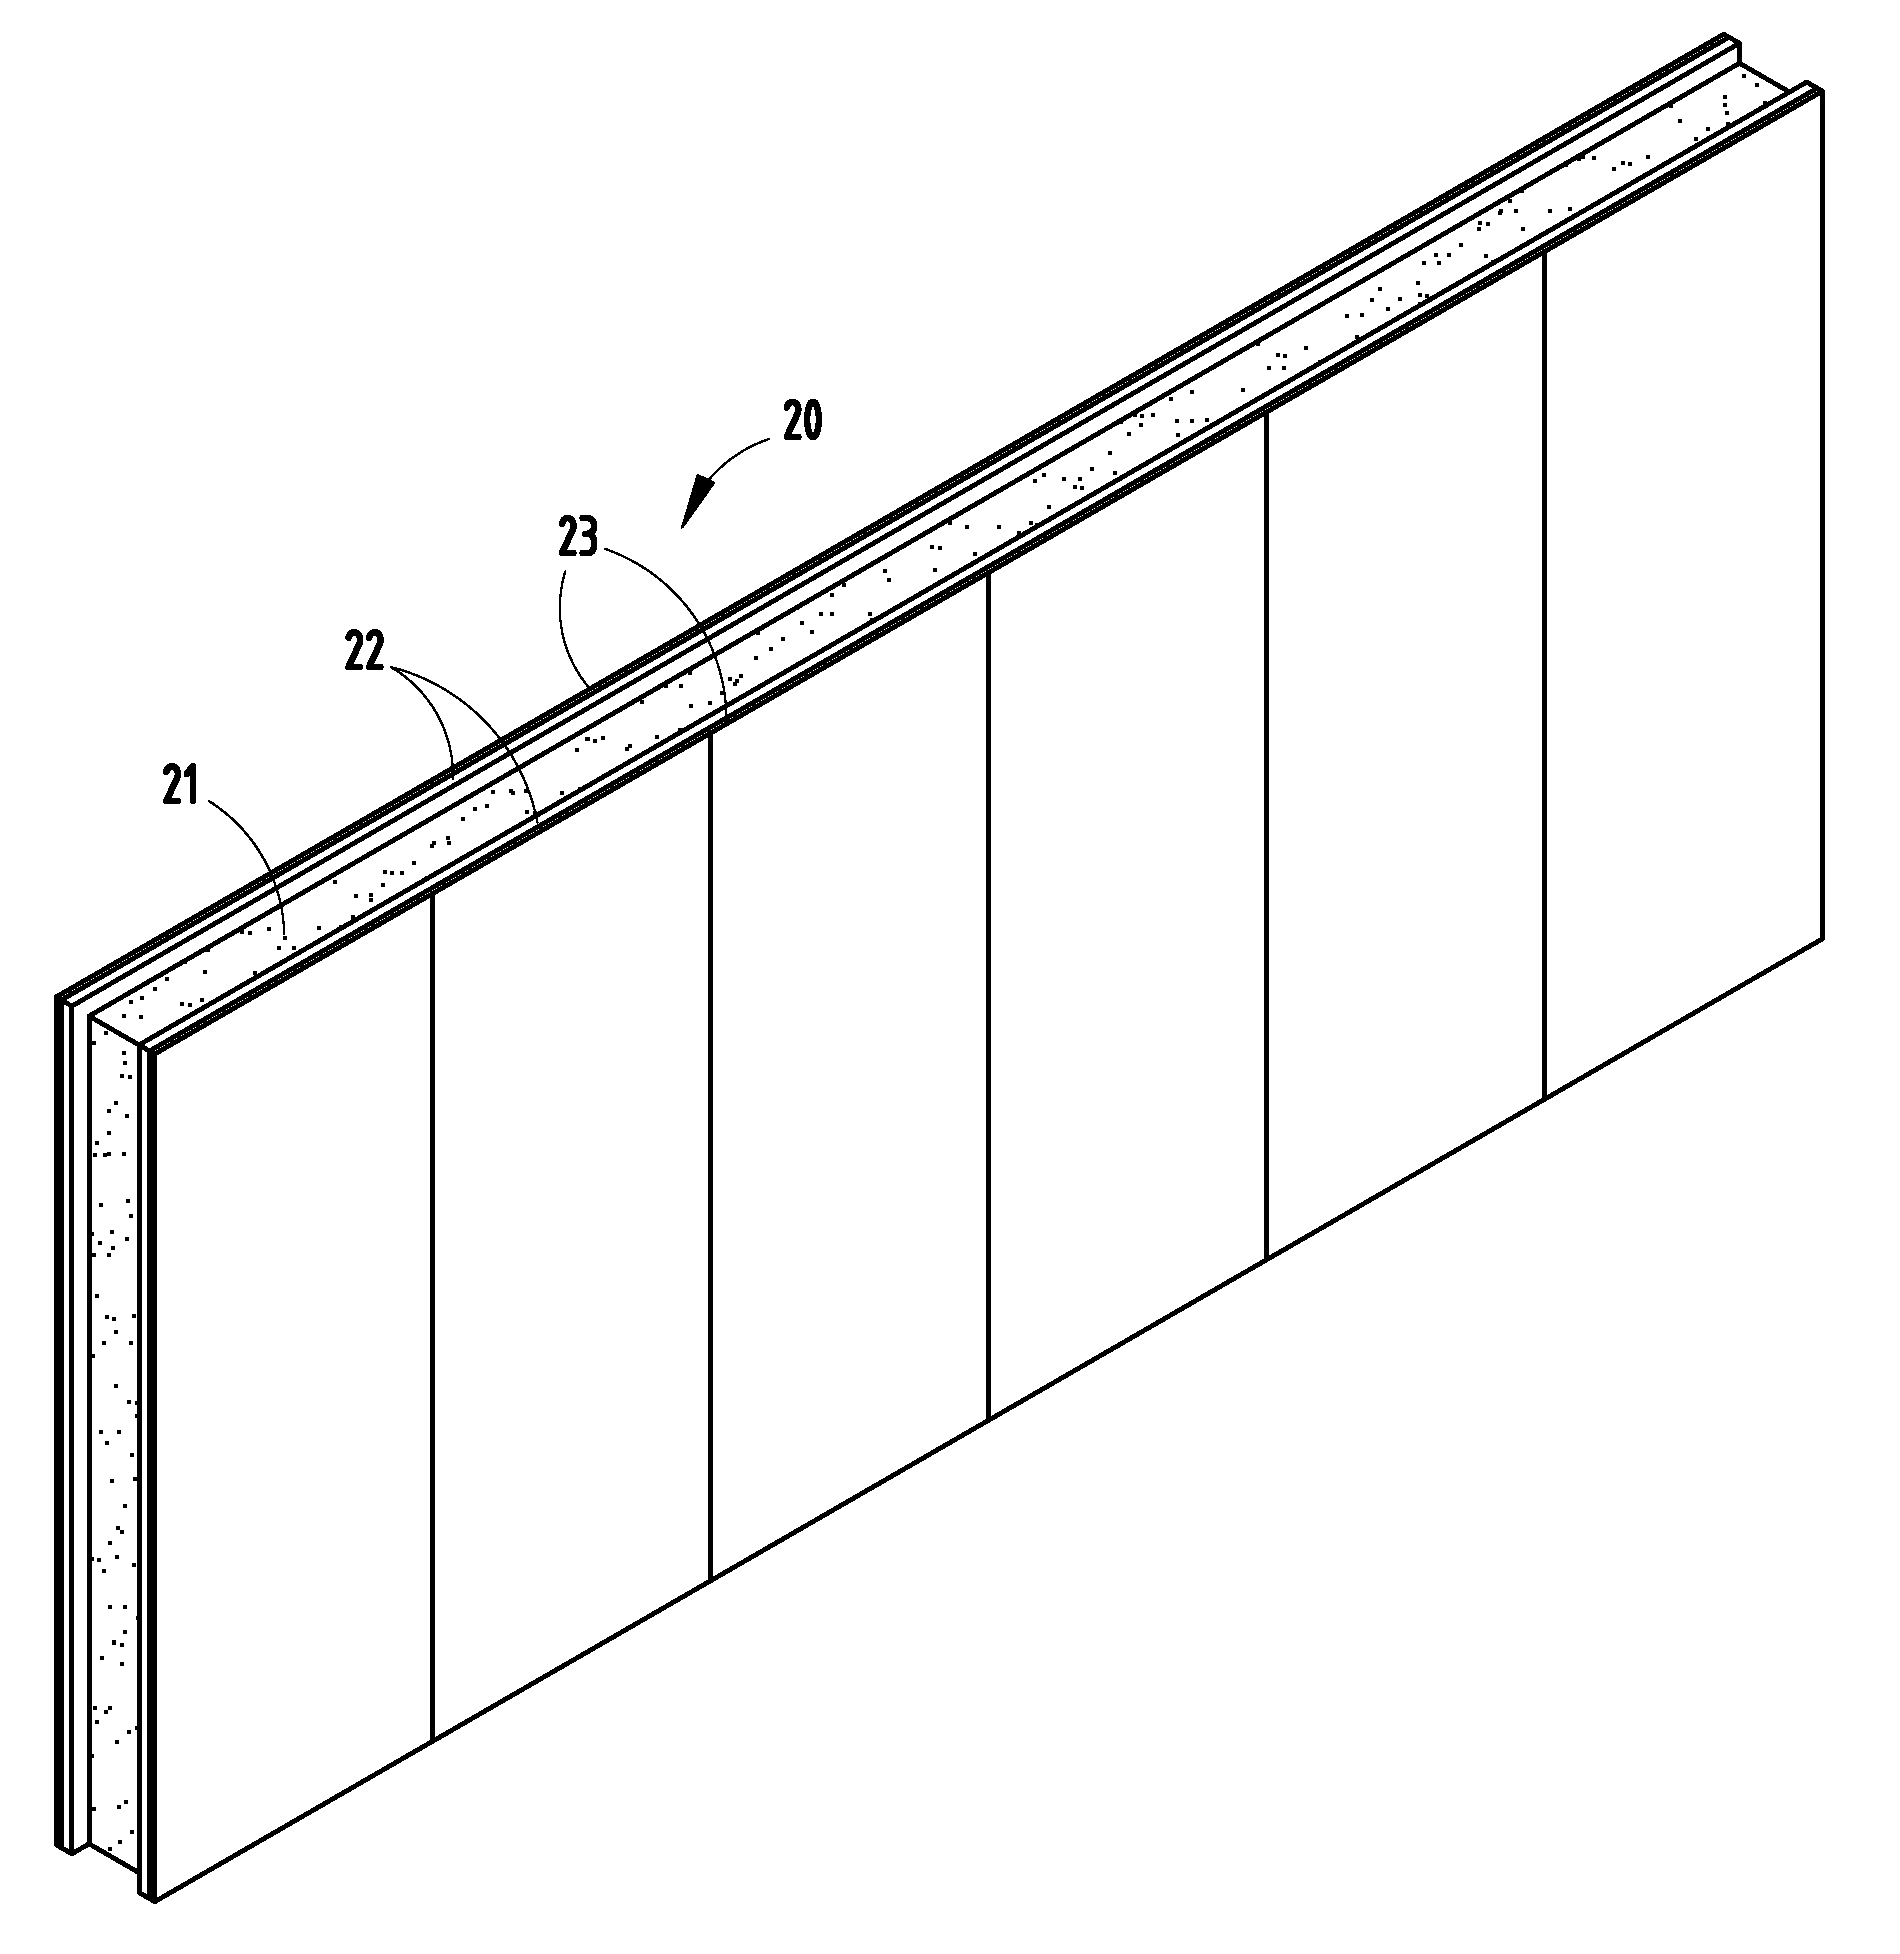 Multilayered structural insulated panel